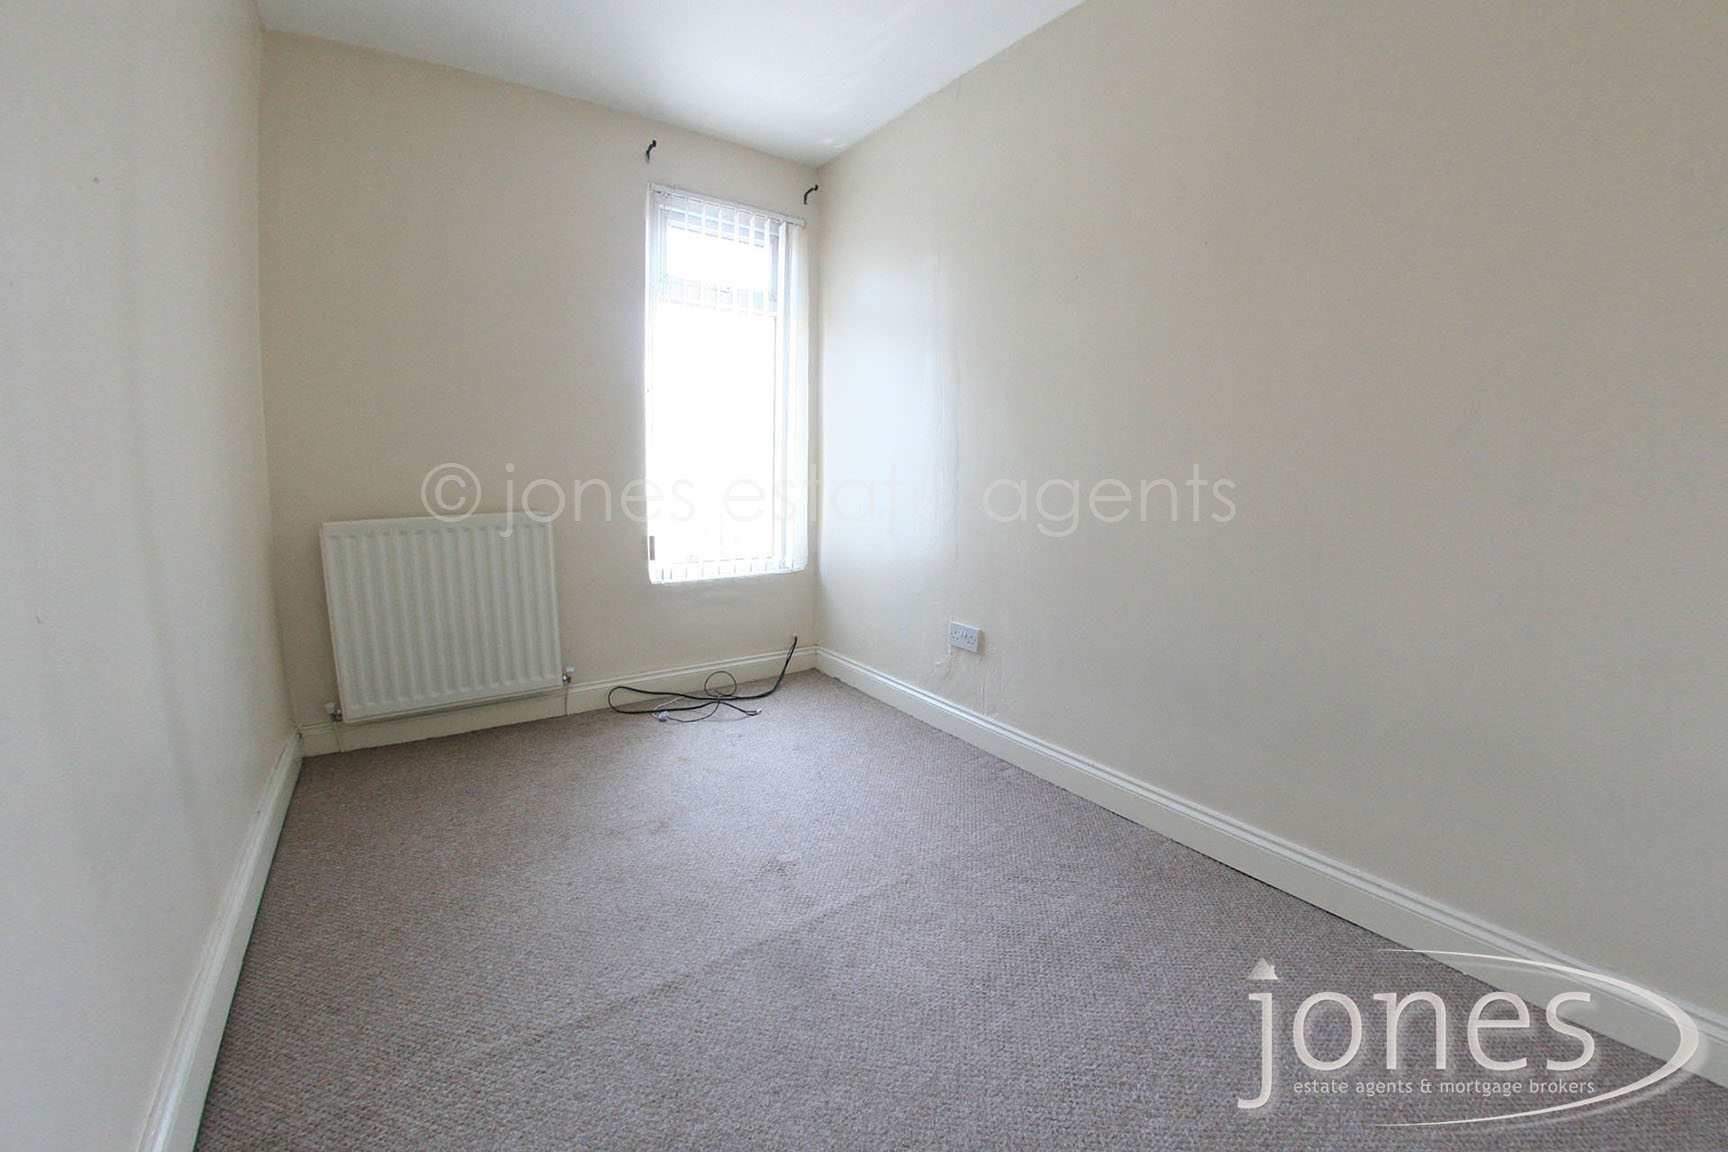 Home for Sale Let - Photo 07 North Road West, Wingate, TS28 5AP